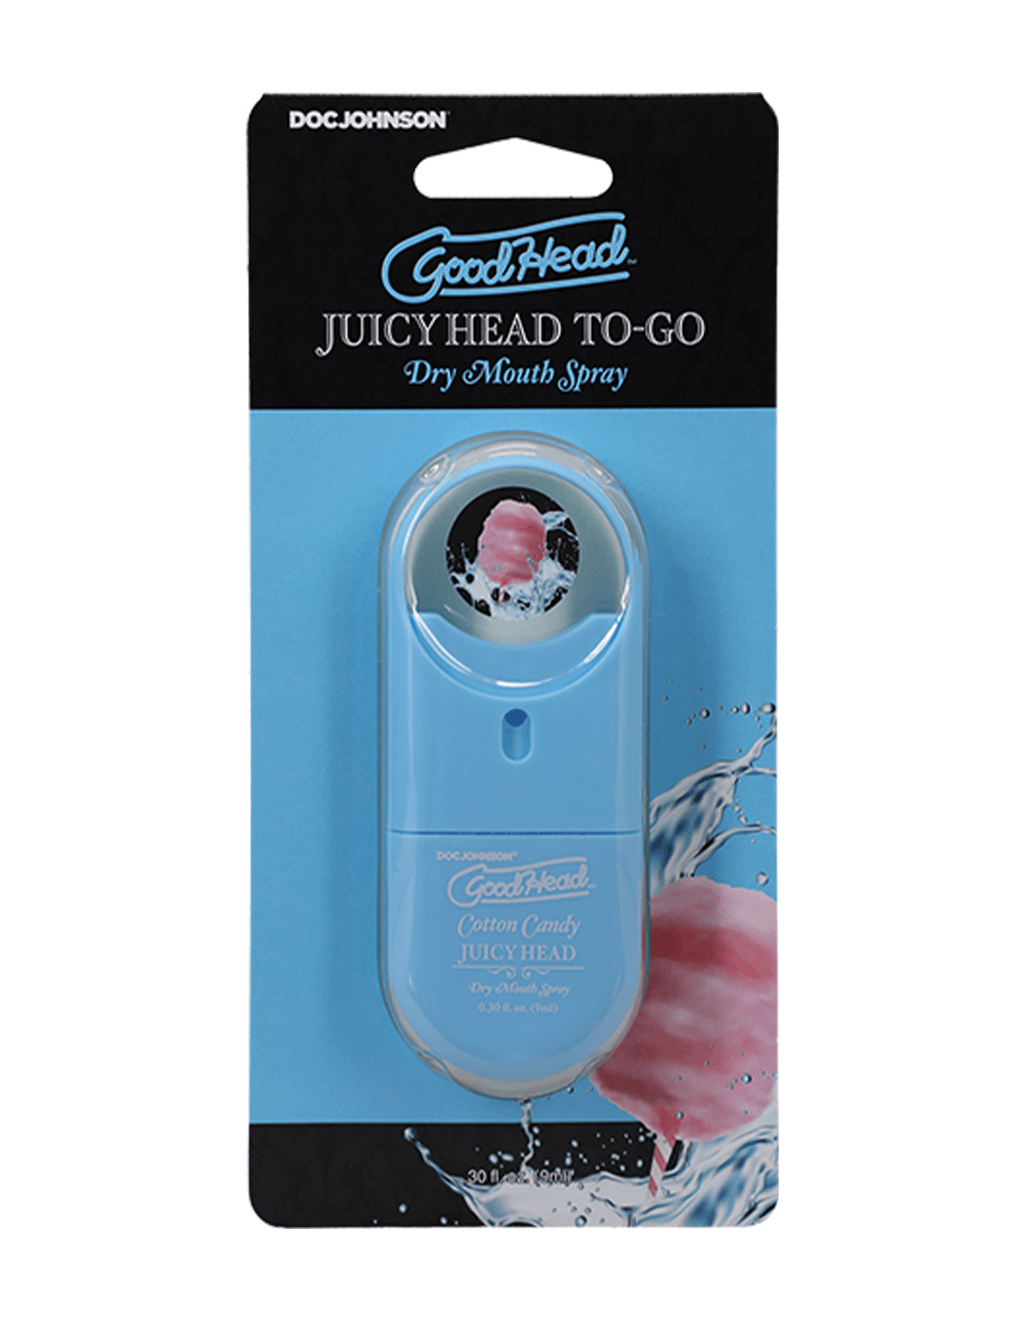 GoodHead Juicy Head To Go - Cotton Candy Package 